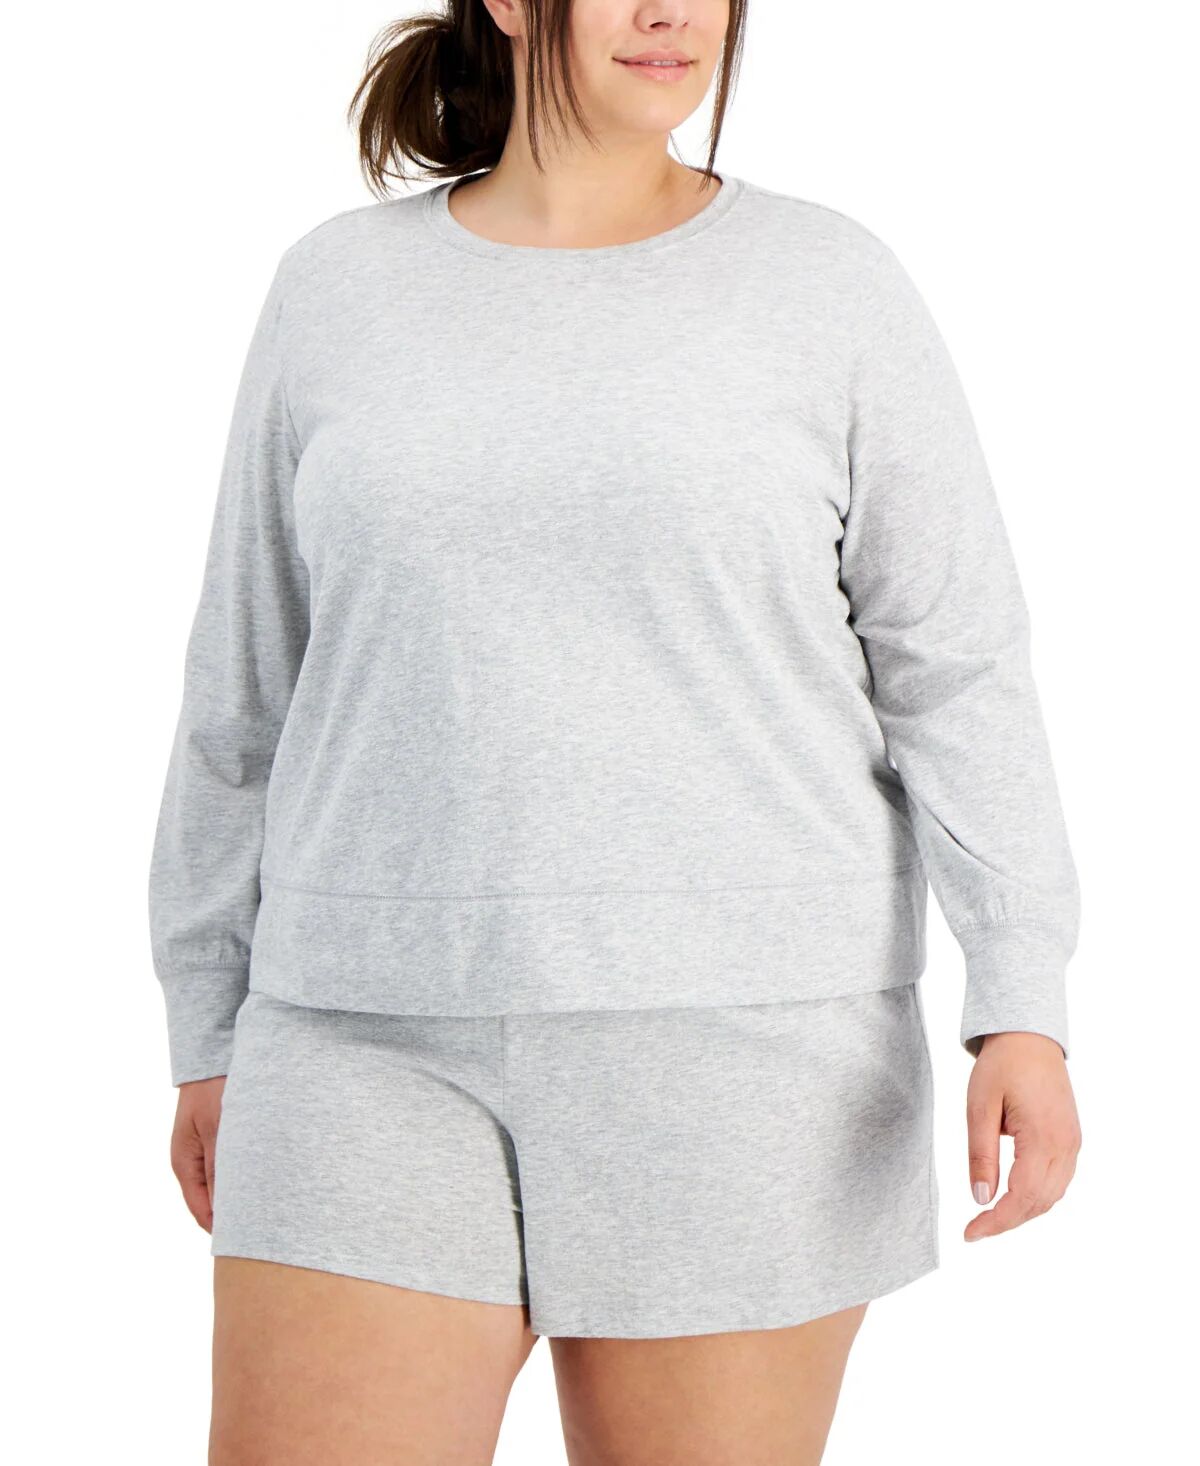 ID Ideology Women's Retro Recycled Long Sleeve Top Gray Size 3X